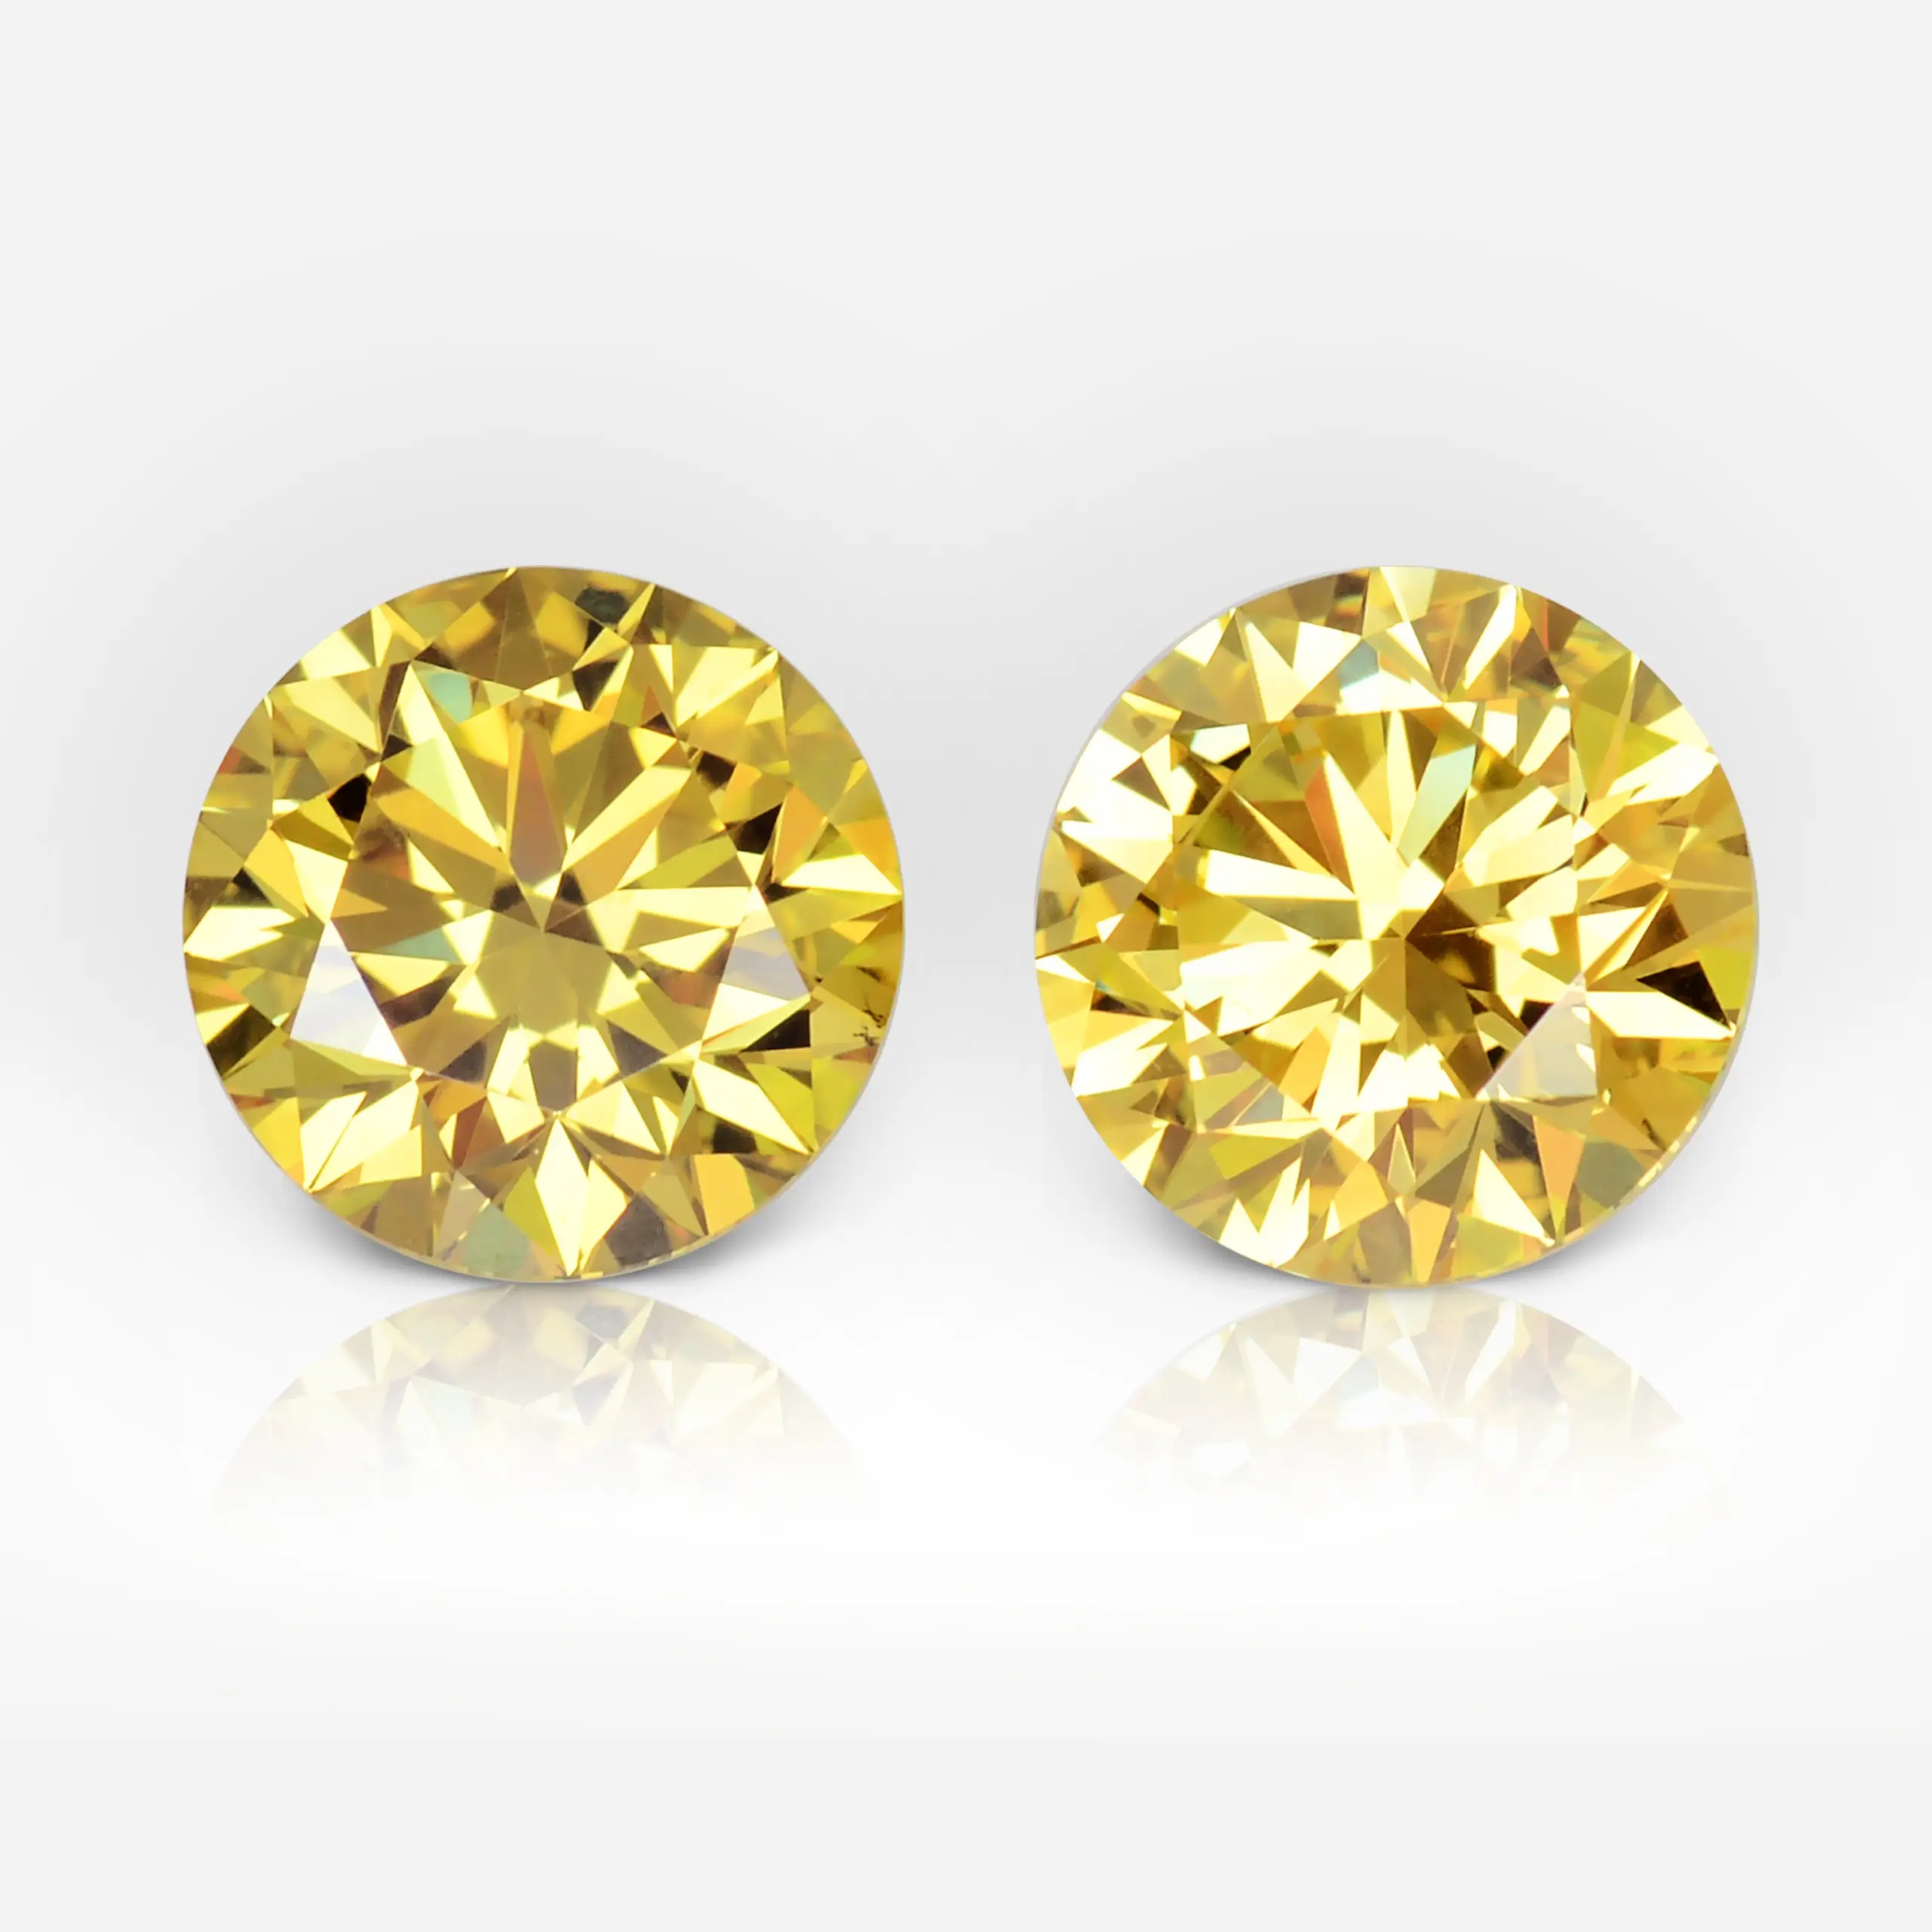 0.80 and 0.80 carat Pair of Fancy Vivid Yellow, Fancy Deep Yellow VS2, SI1 Round Shape Diamonds GIA - picture 1